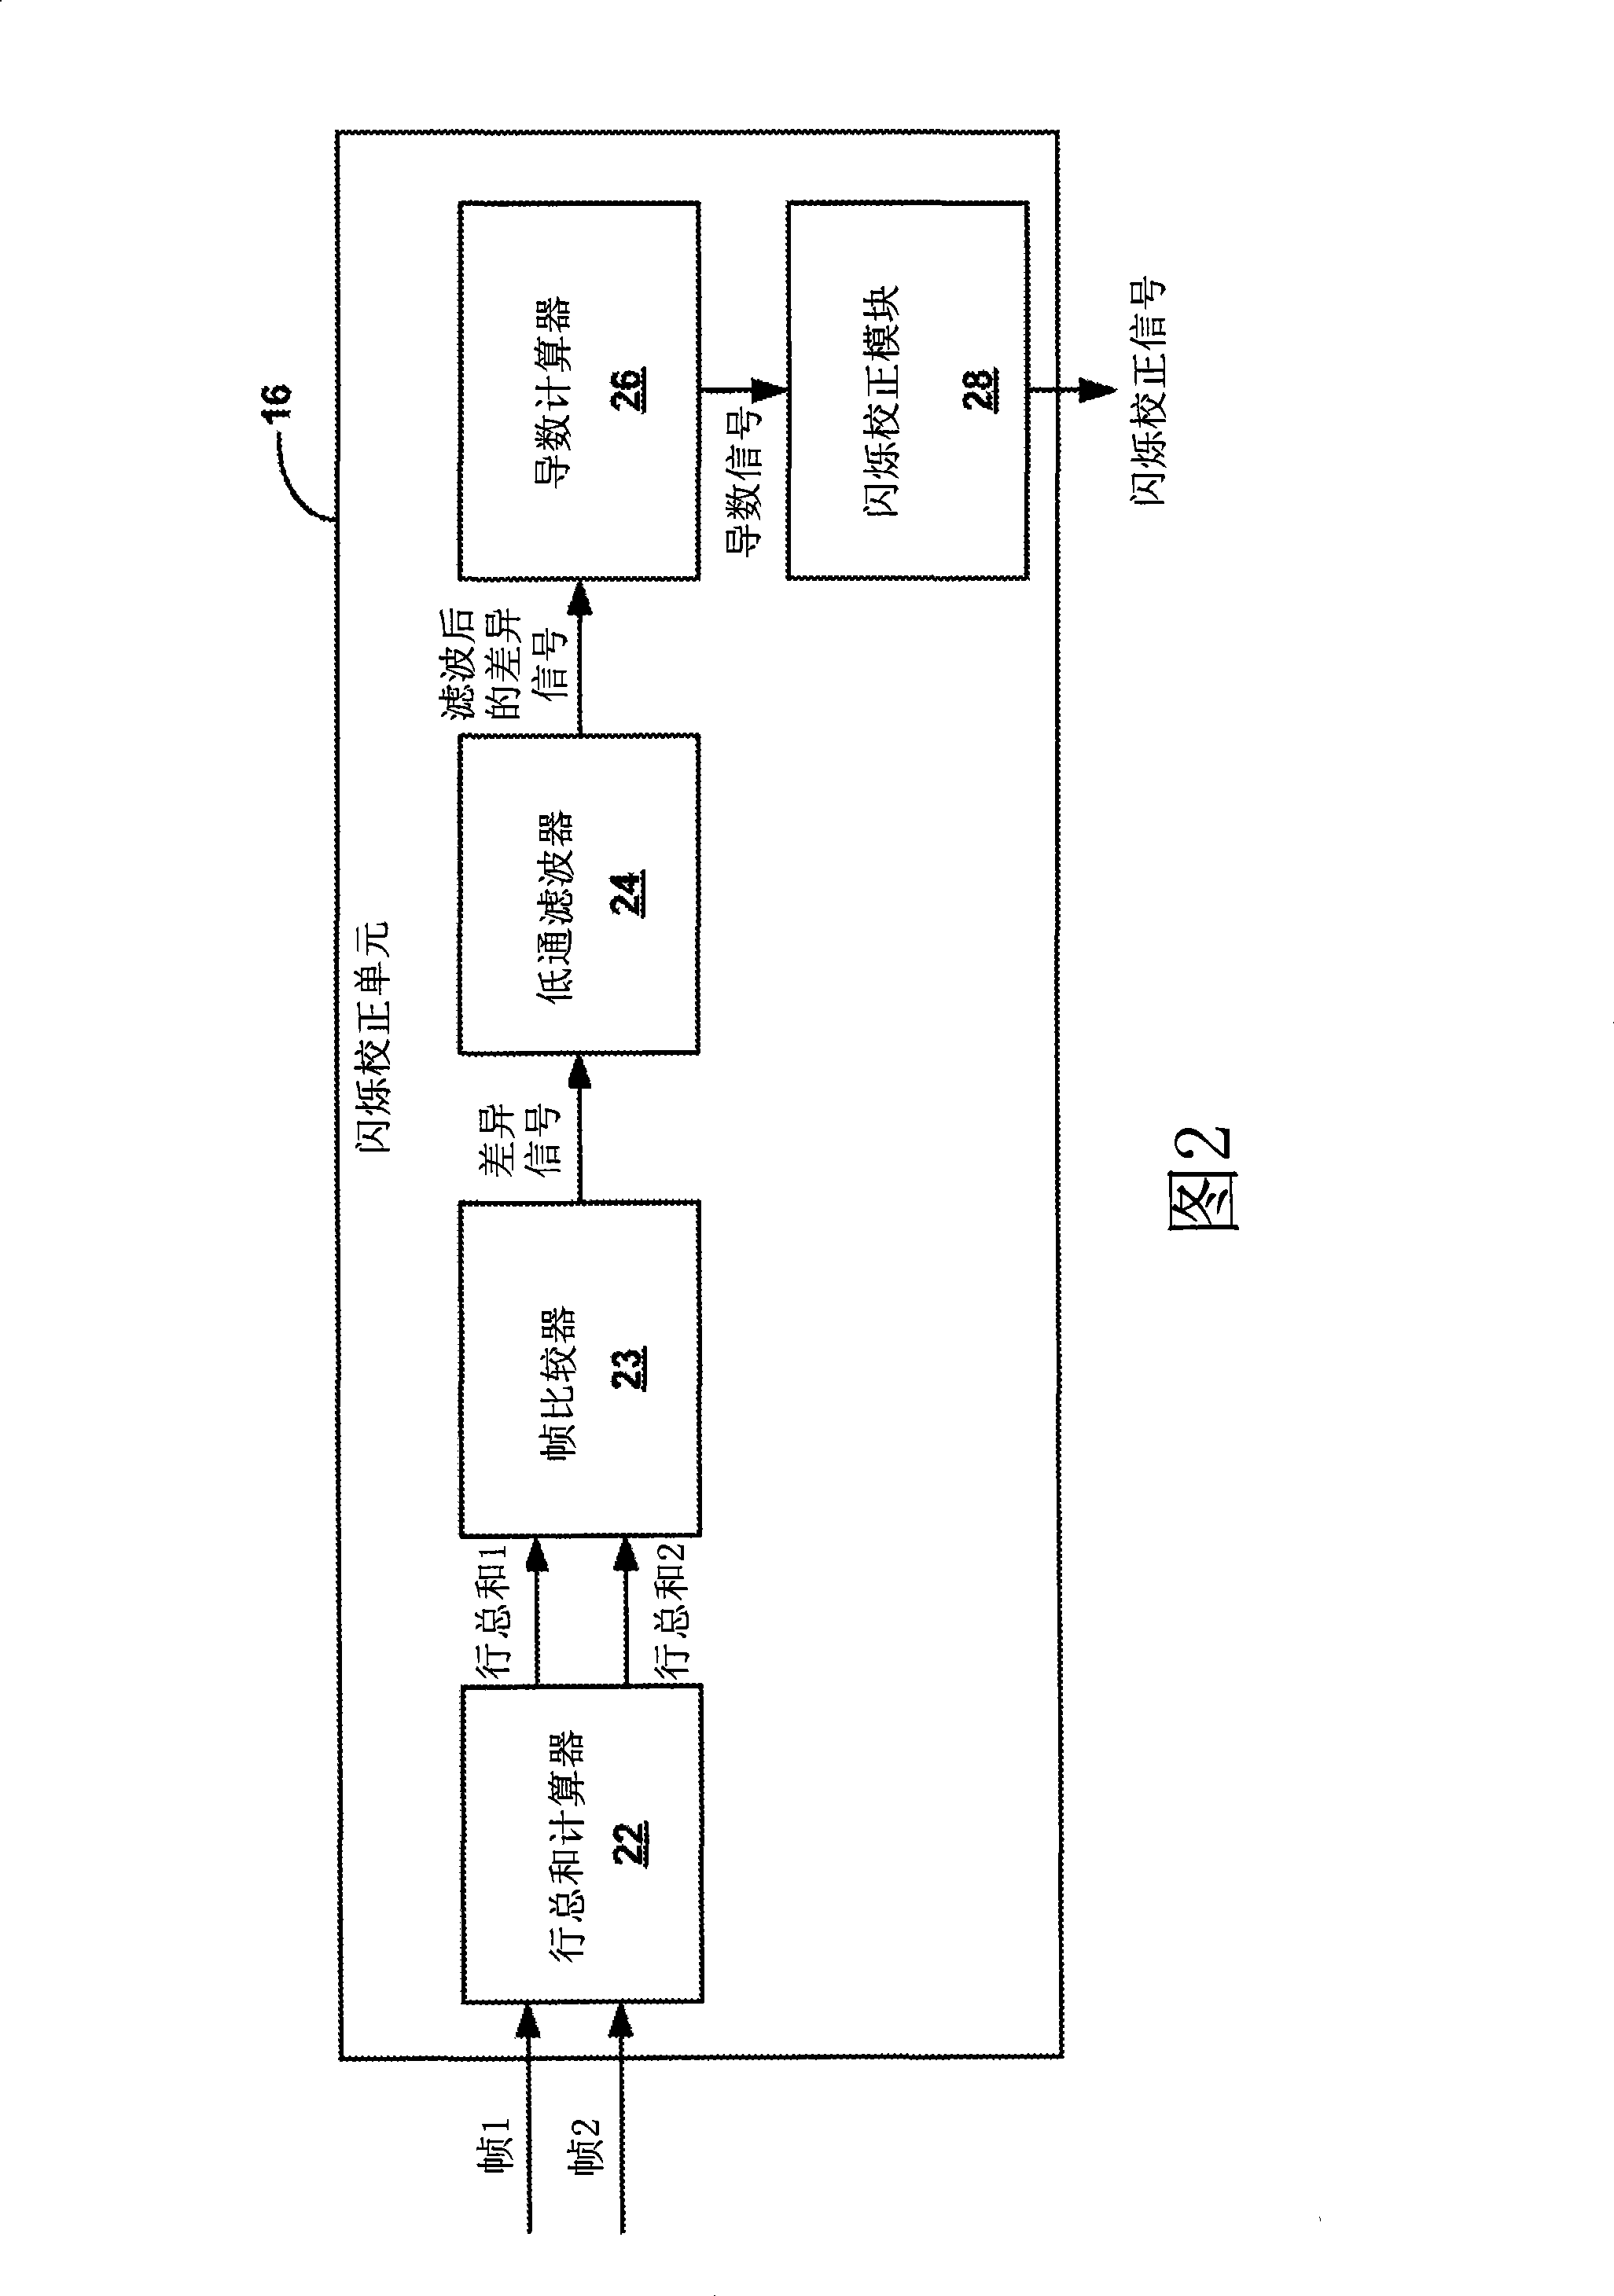 Automatic flicker correction in an image capture device